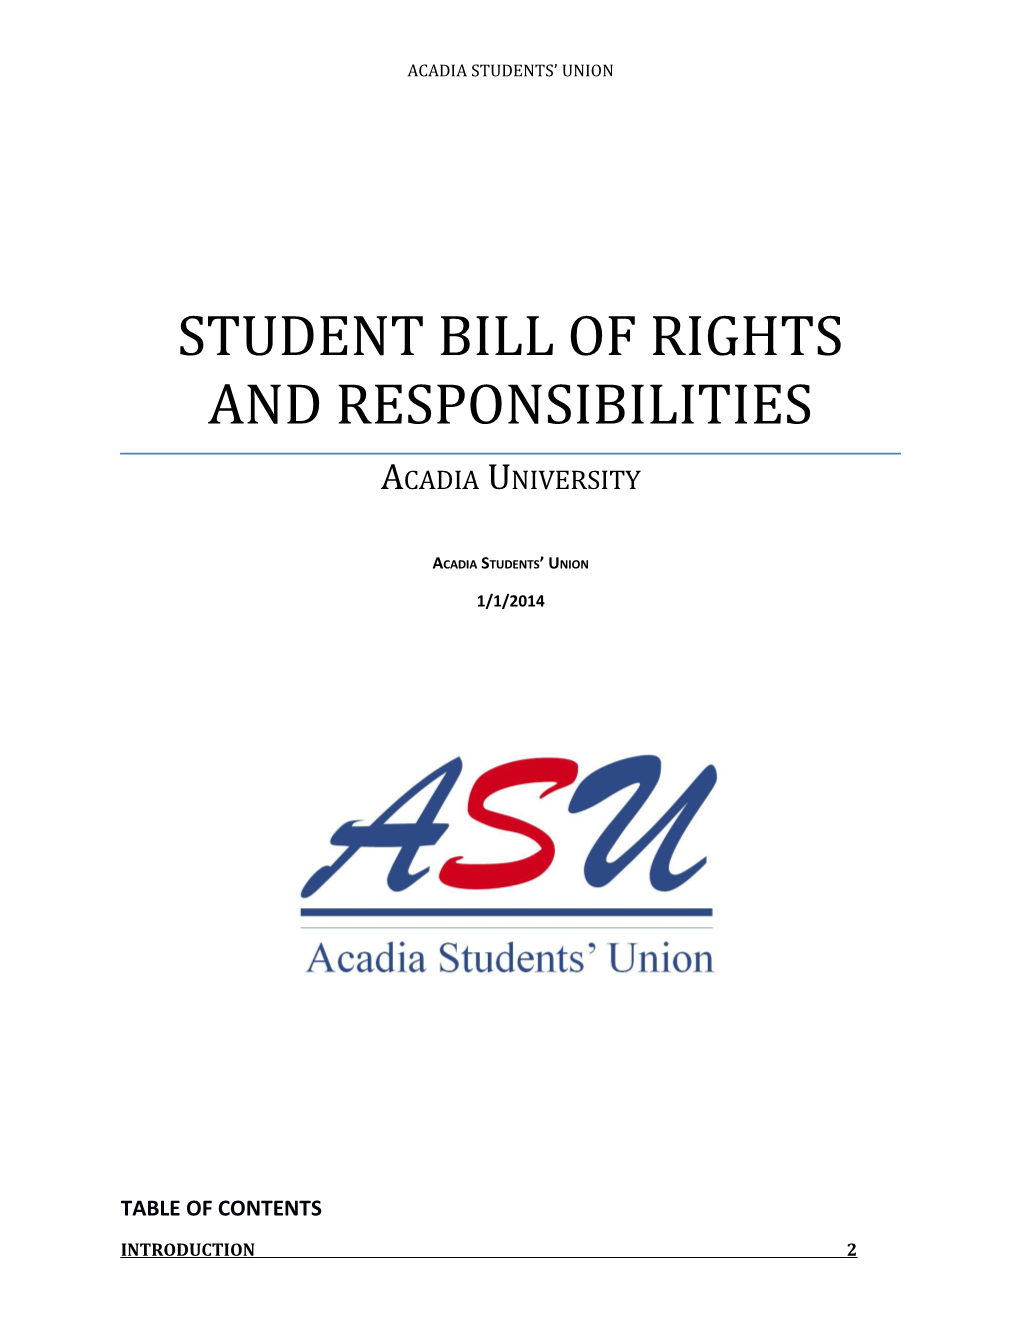 Student Bill of Rights and Responsibilities